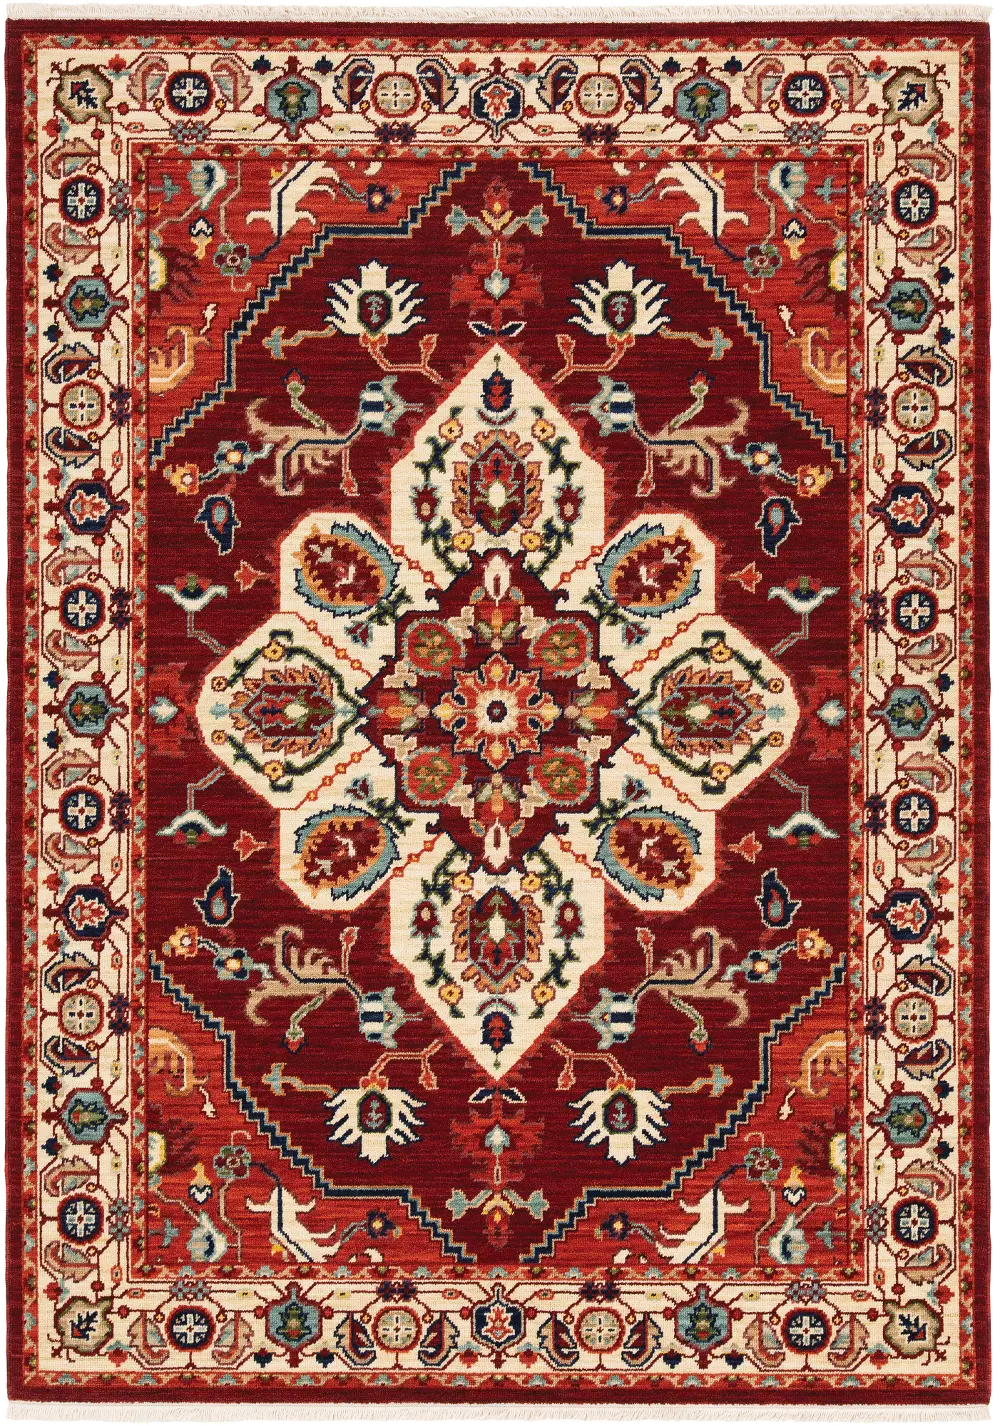 8 x 10 Large Red and Ivory Area Rug - Lilihan-1